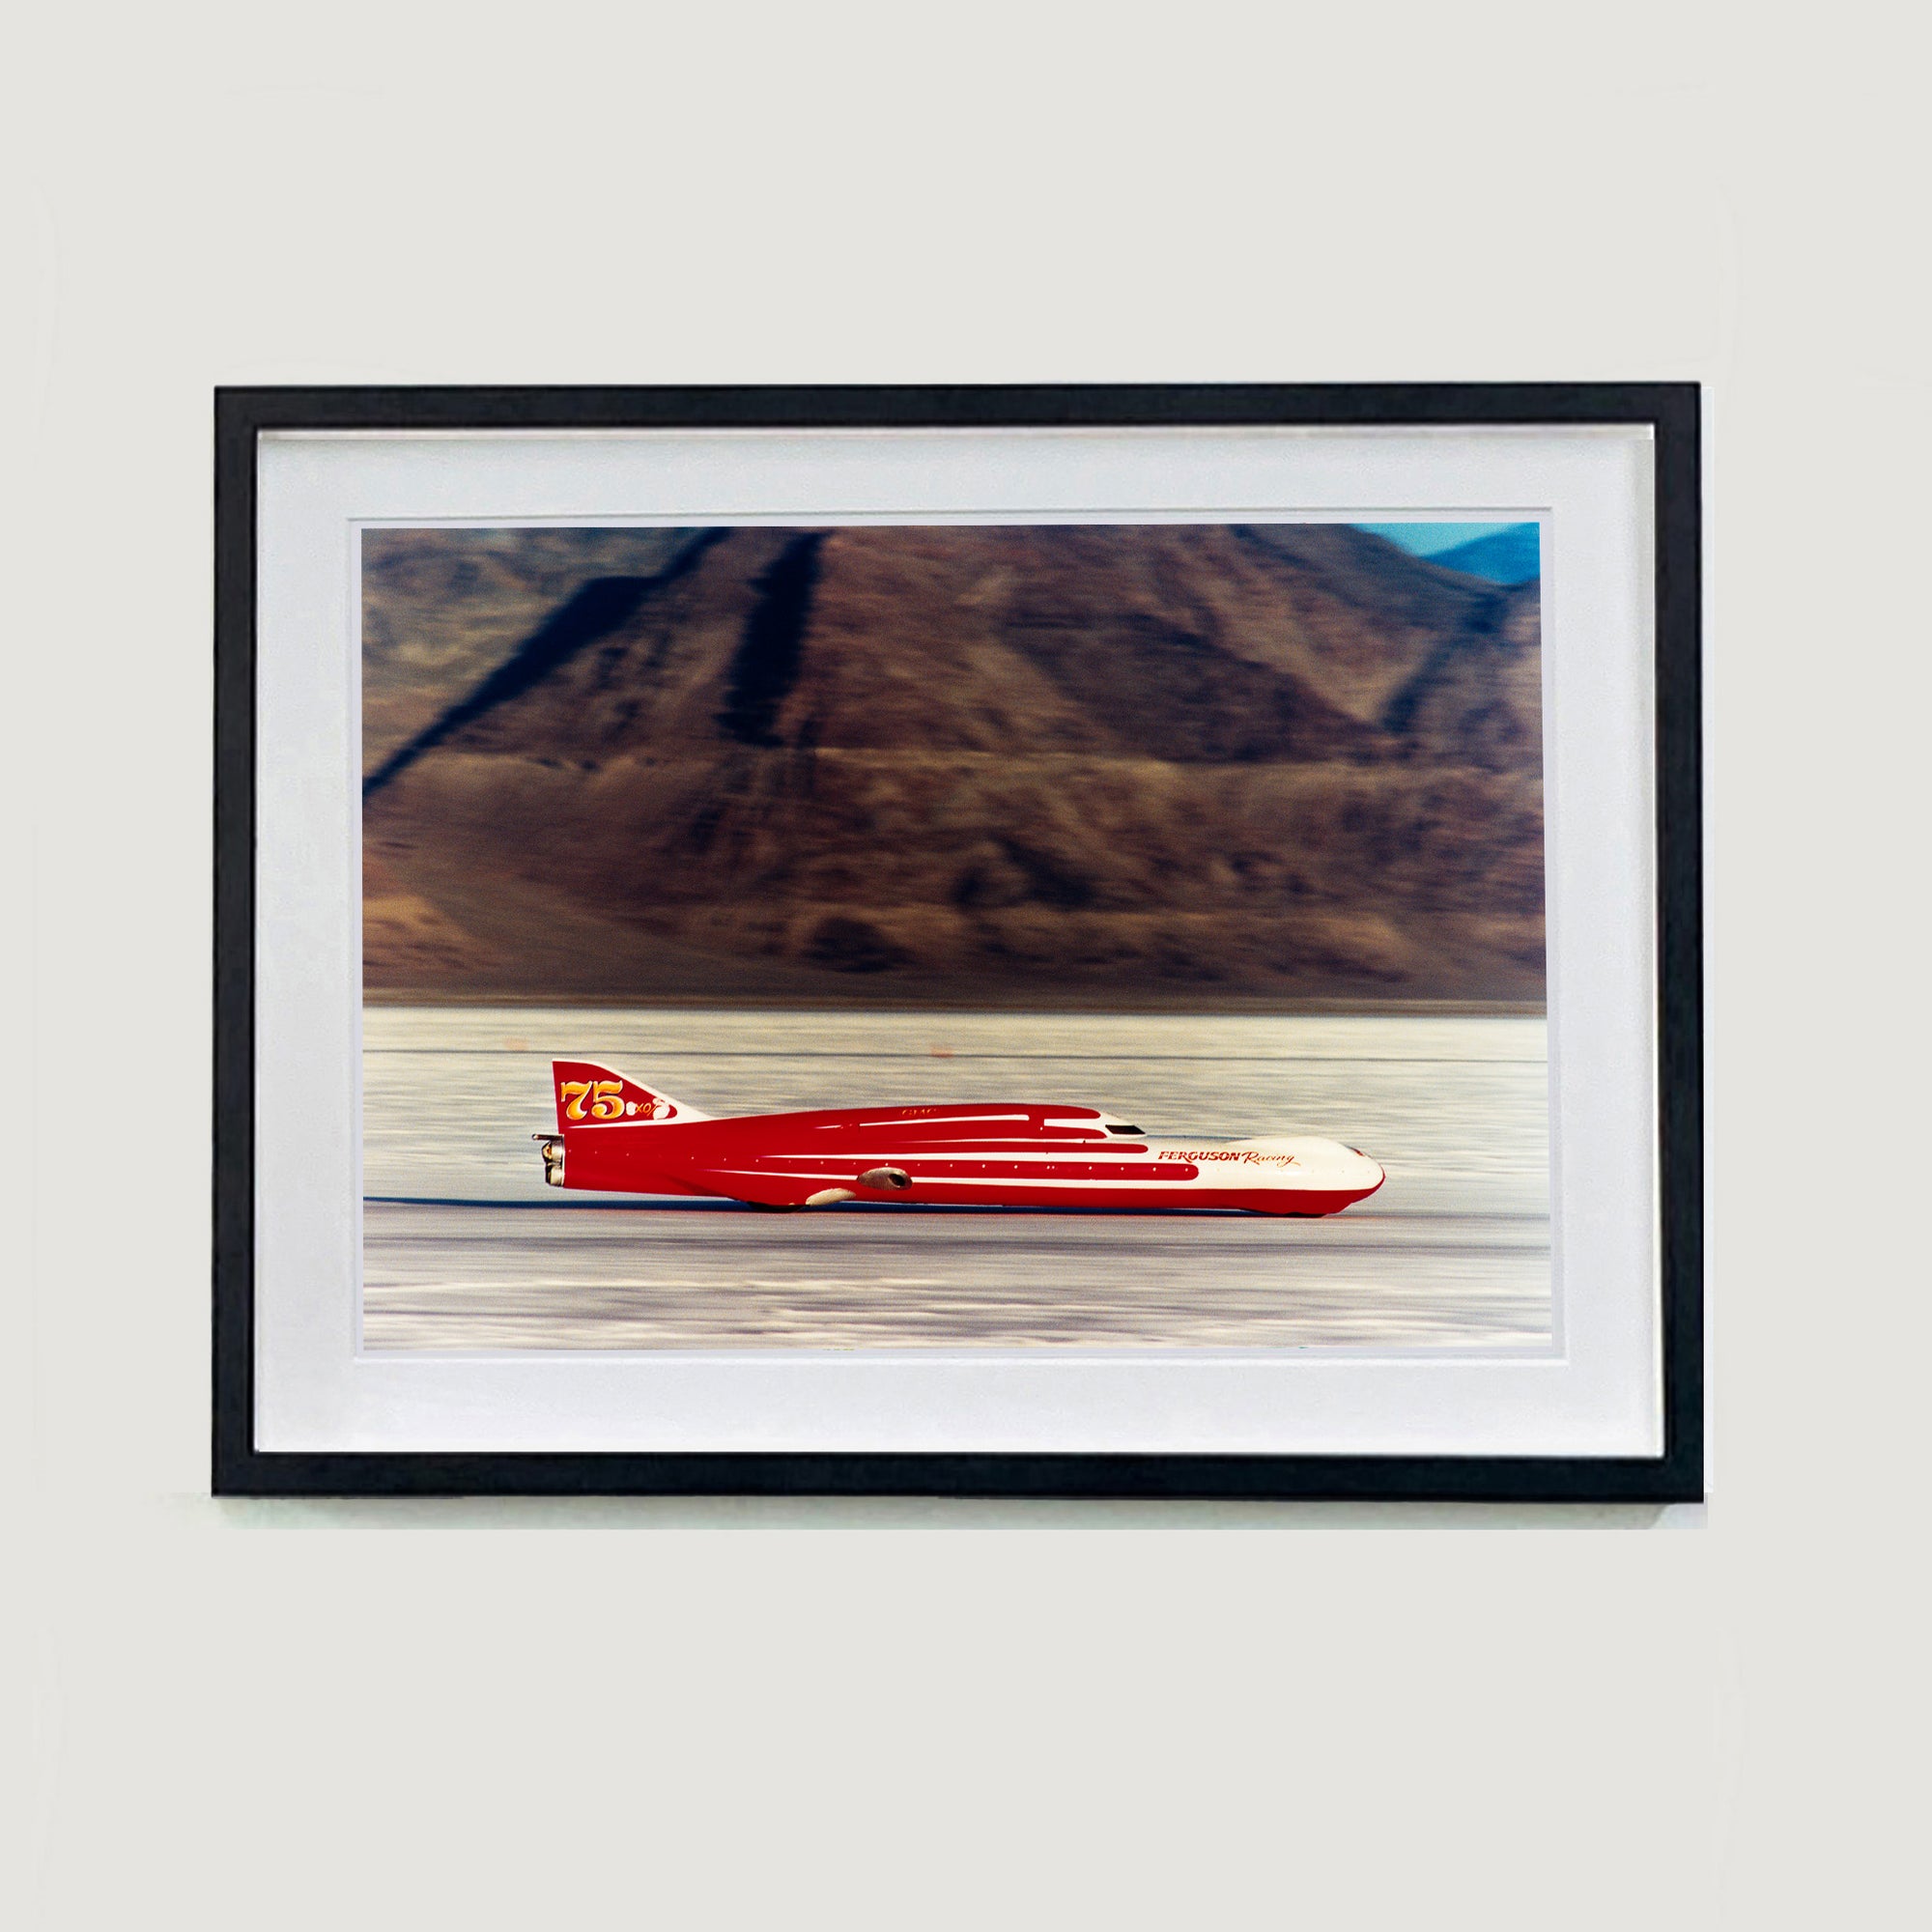 Black framed photograph by Richard Heeps.  A Red Ferguson Racing Streamliner sits on a smooth salt flat with mountains in the background.